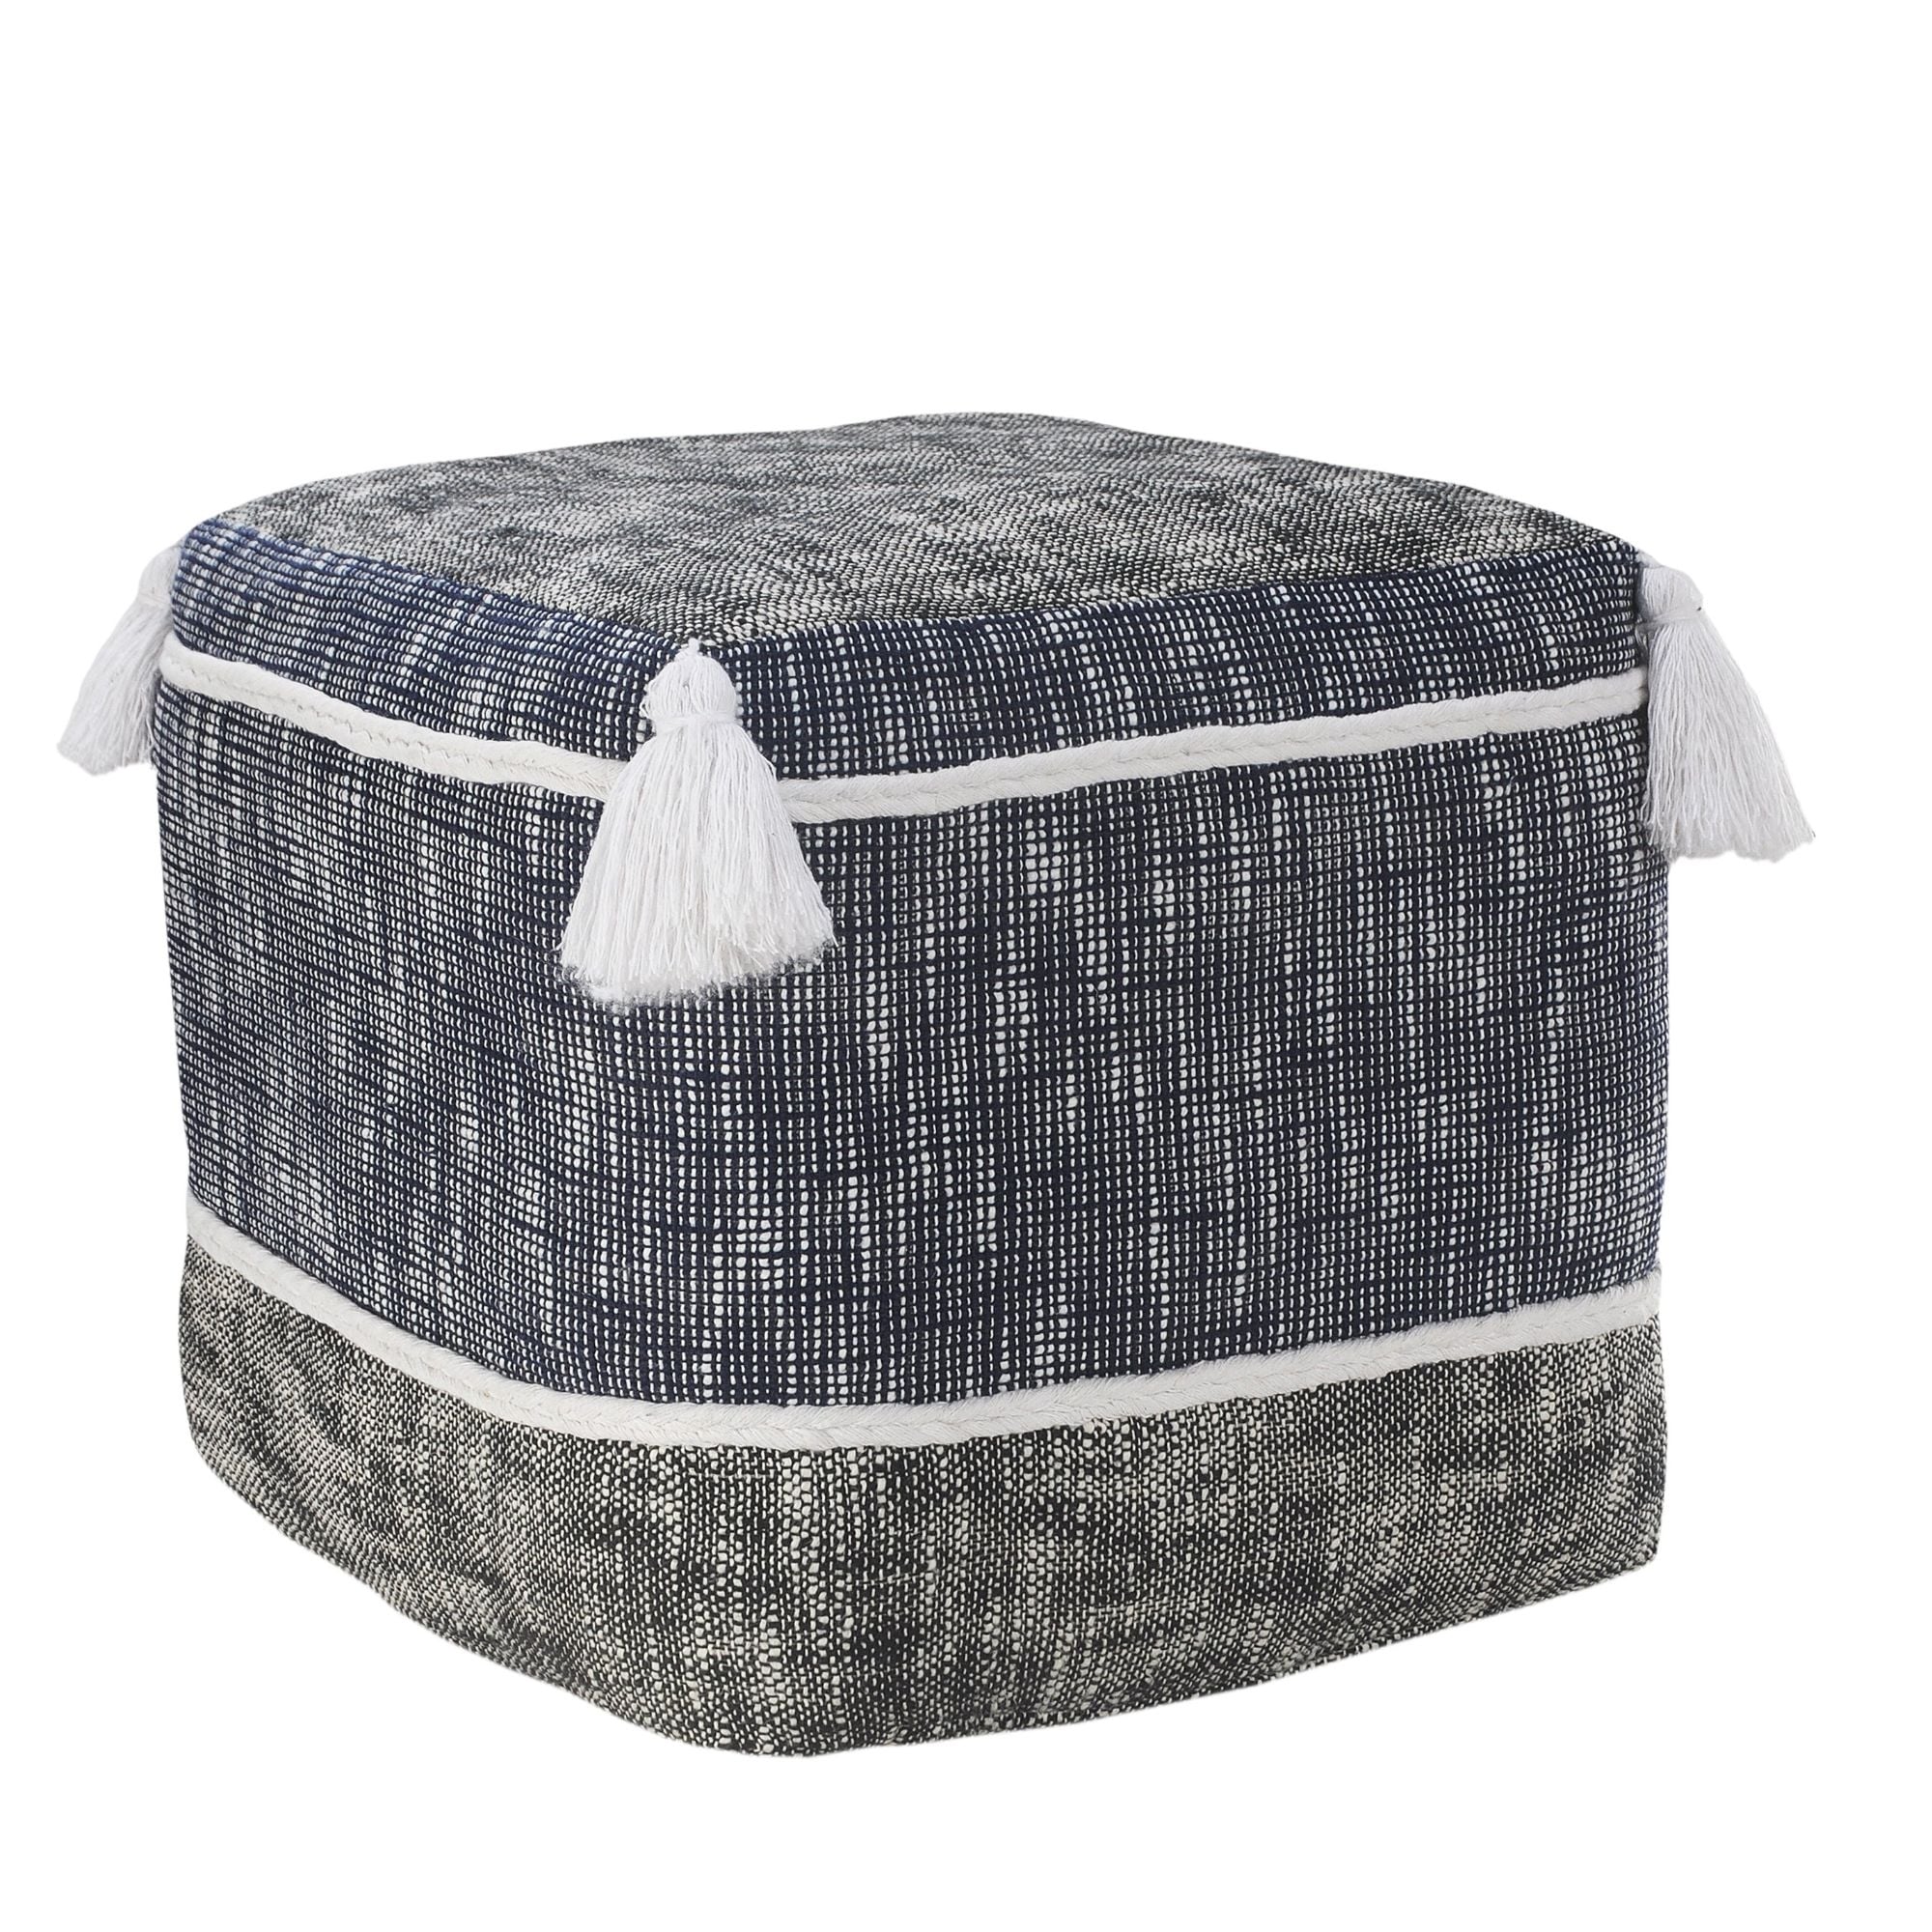 Laddha Home Designs 16 inch Blue White Distressed Rope Lined Square Pouf Ottoman with Tassels